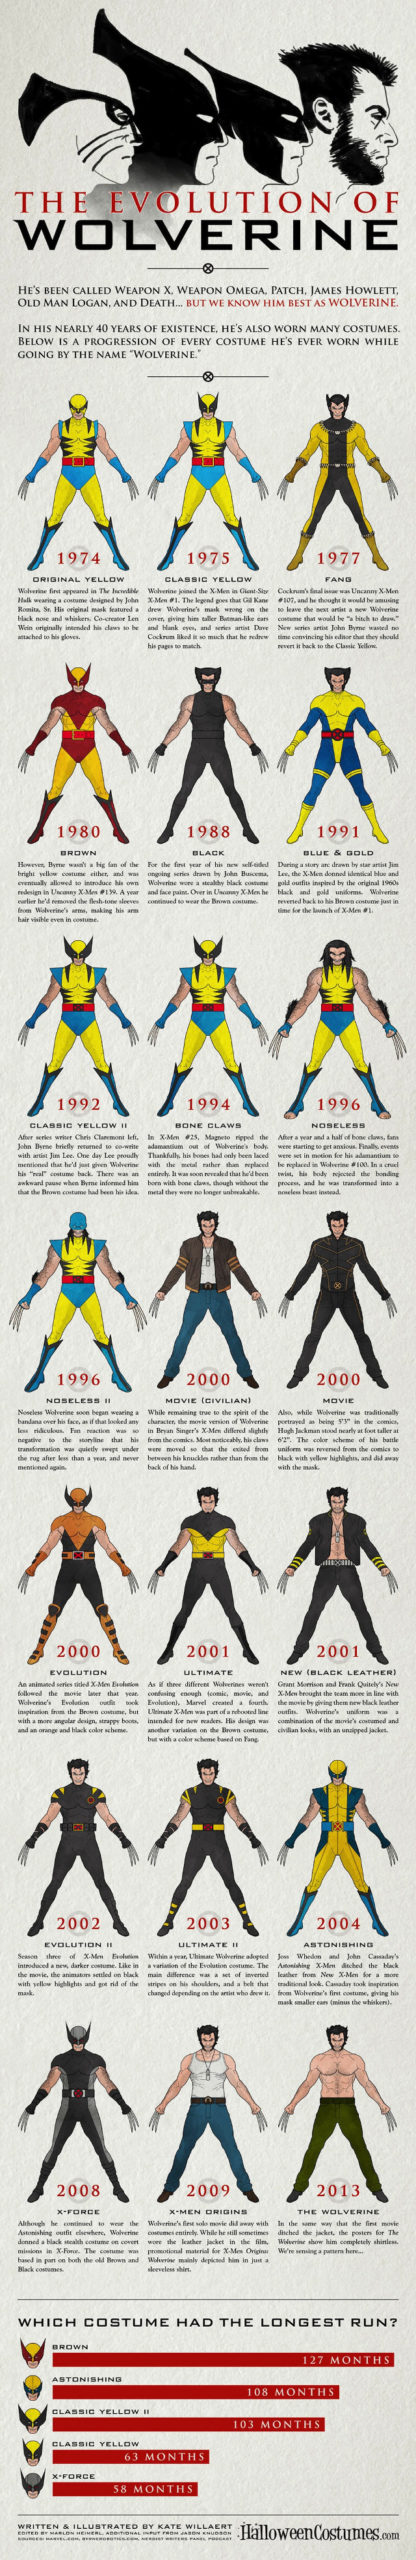 The Evolution Of Wolverine, From 1974 To Today